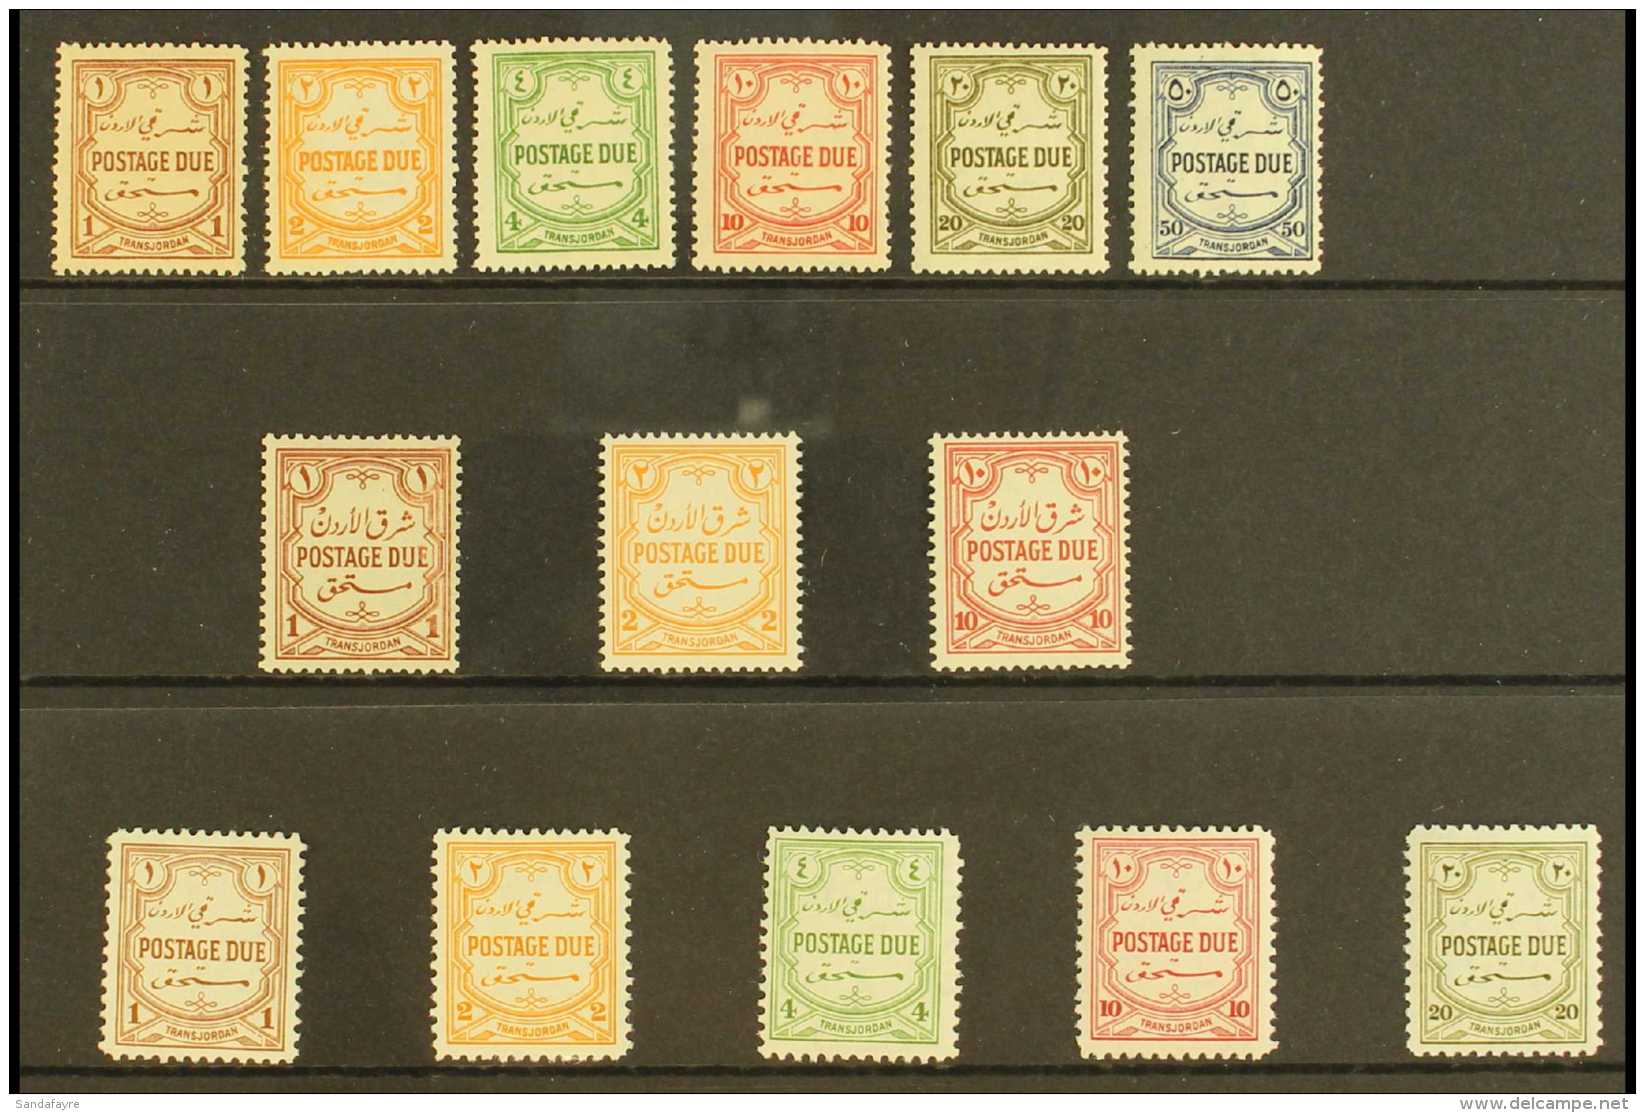 POSTAGE DUE 1929-49 MINT COLLECTION. A Complete Run From 1929-49, SG D189/94, SG D230/32 &amp; SG D244/48, A Fine... - Jordan